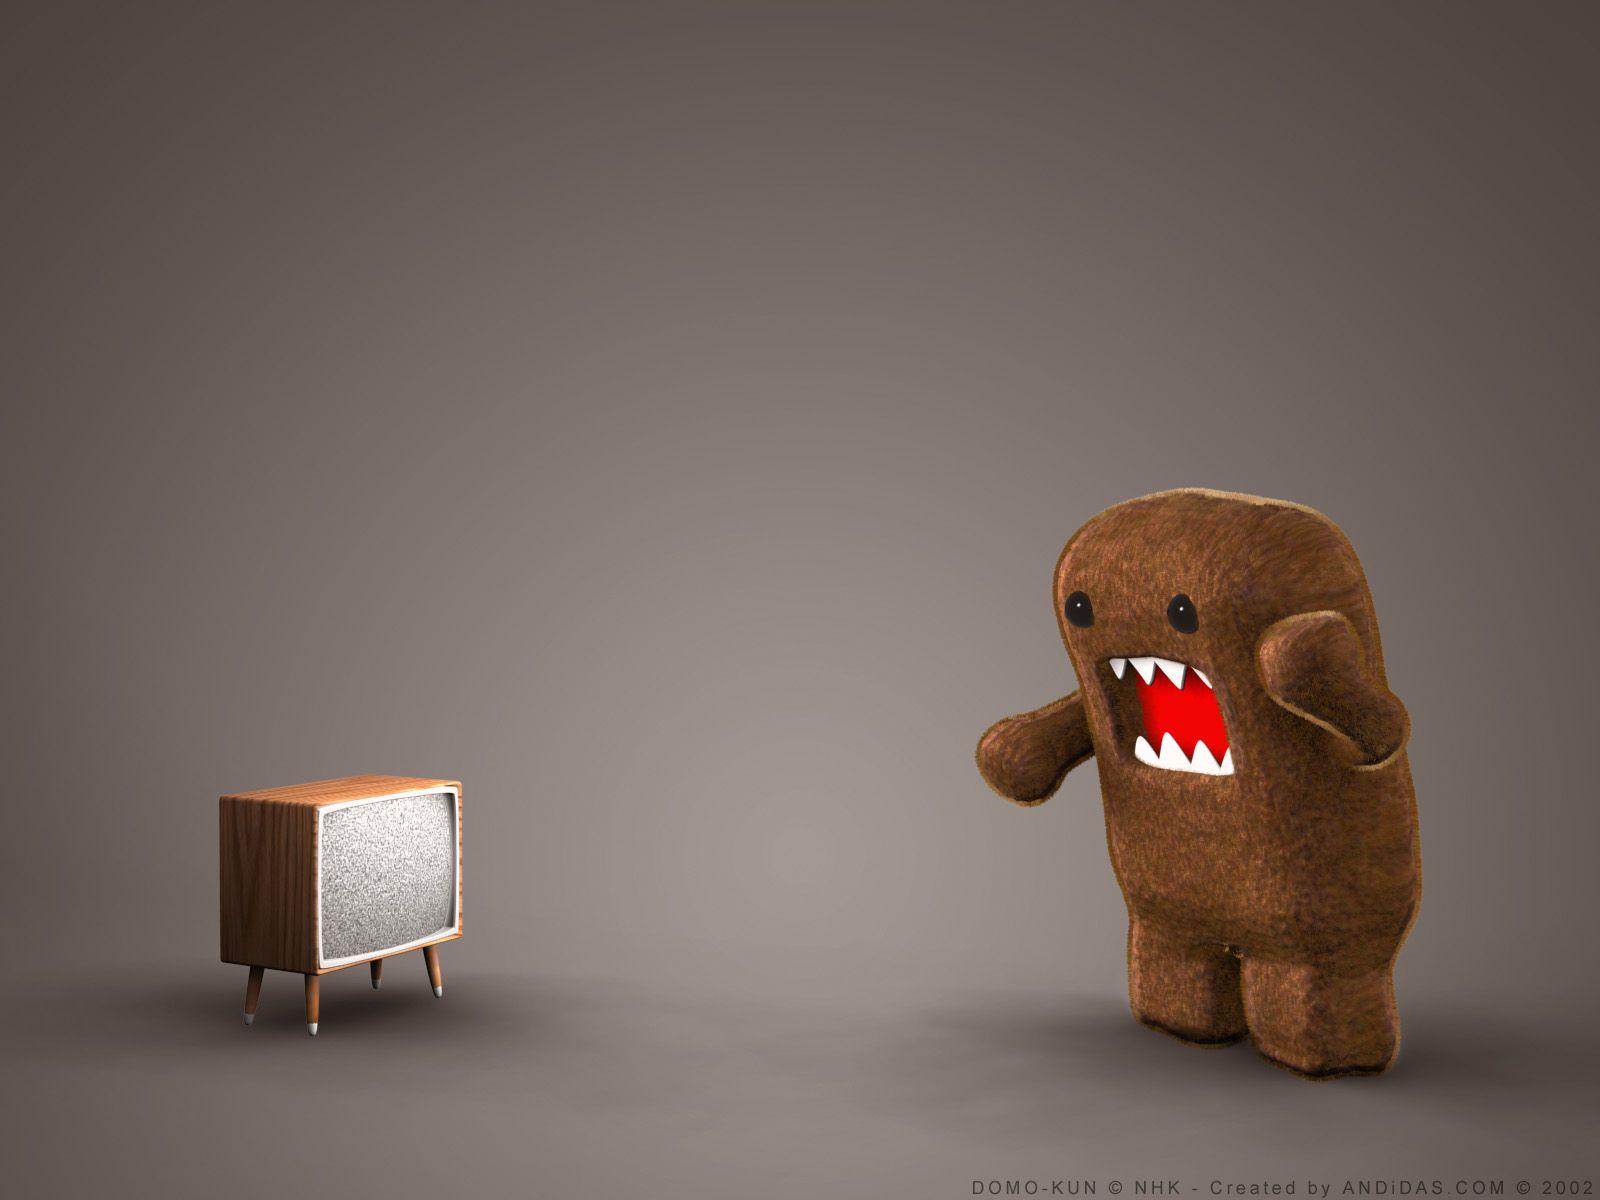 Domo Kun Wallpaper, wallpaper, Domo Kun Wallpapers hd wallpapers